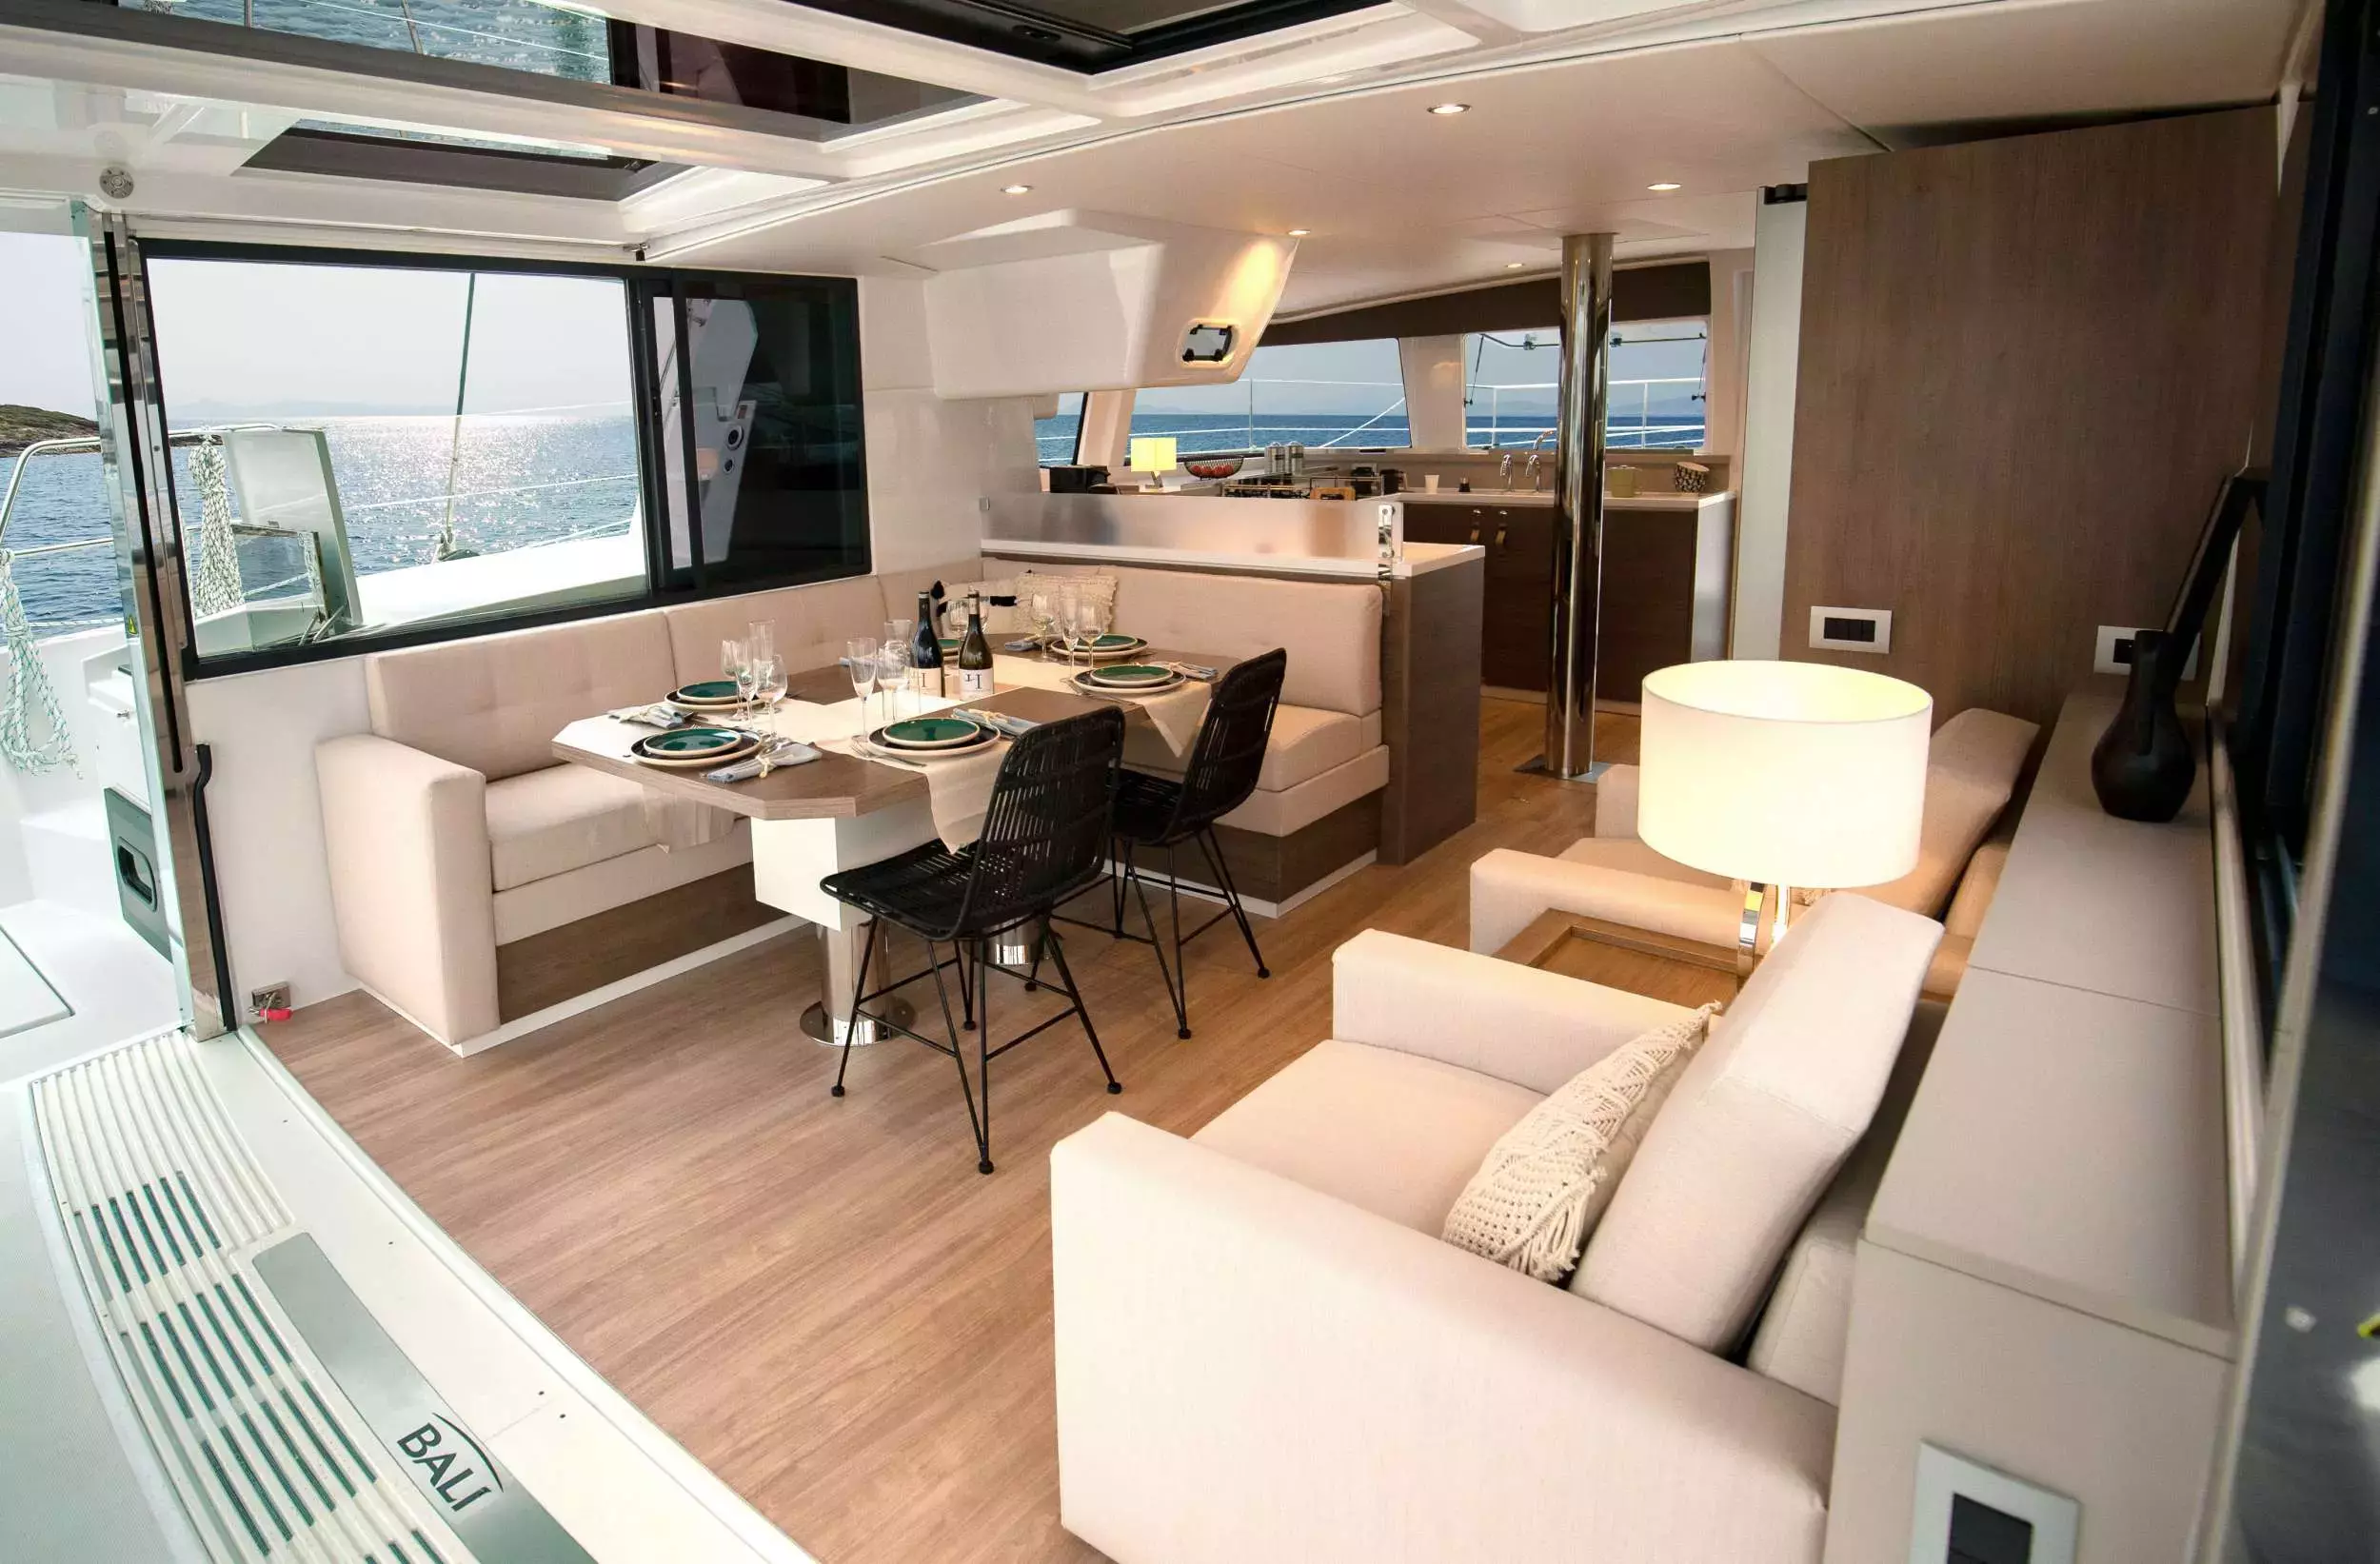 Knowker by Bali Catamarans - Special Offer for a private Sailing Catamaran Rental in Ibiza with a crew